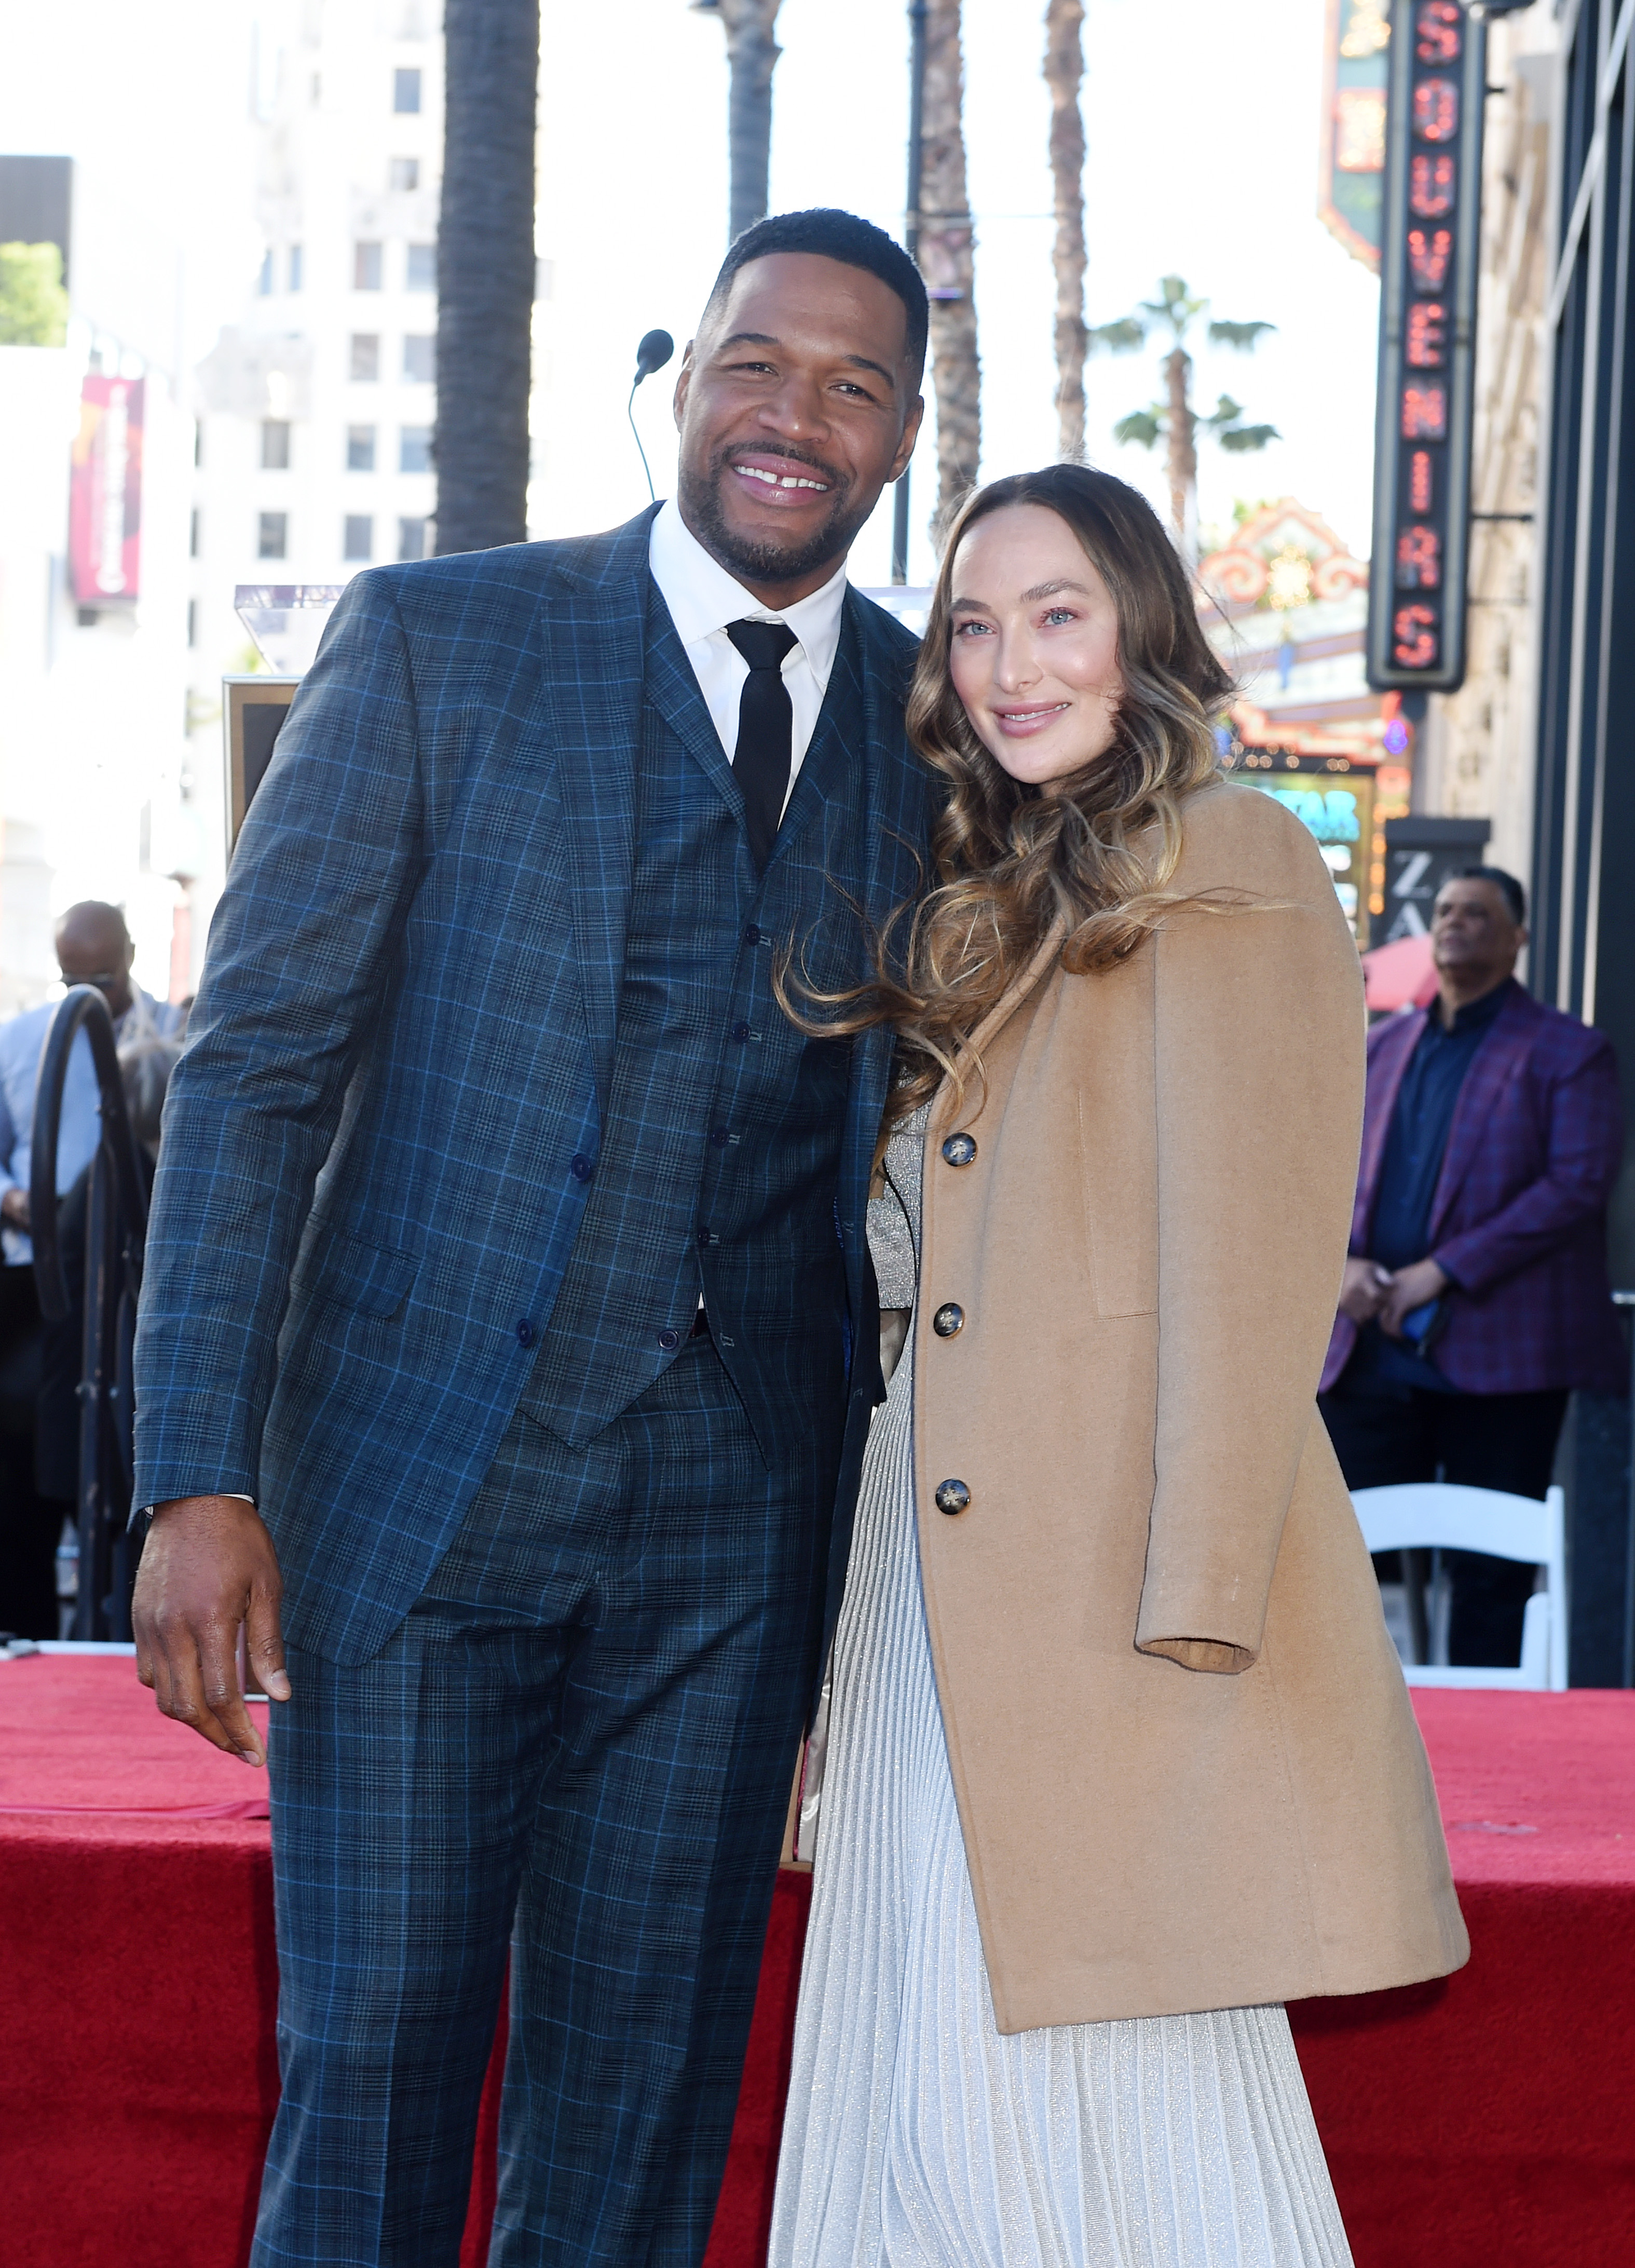 Kayla Quick attends Michael Strahan's ceremony as he receives his first Sports Entertainment star on the Hollywood Walk of Fame in Los Angeles on January 23, 2023. | Source: Getty Images